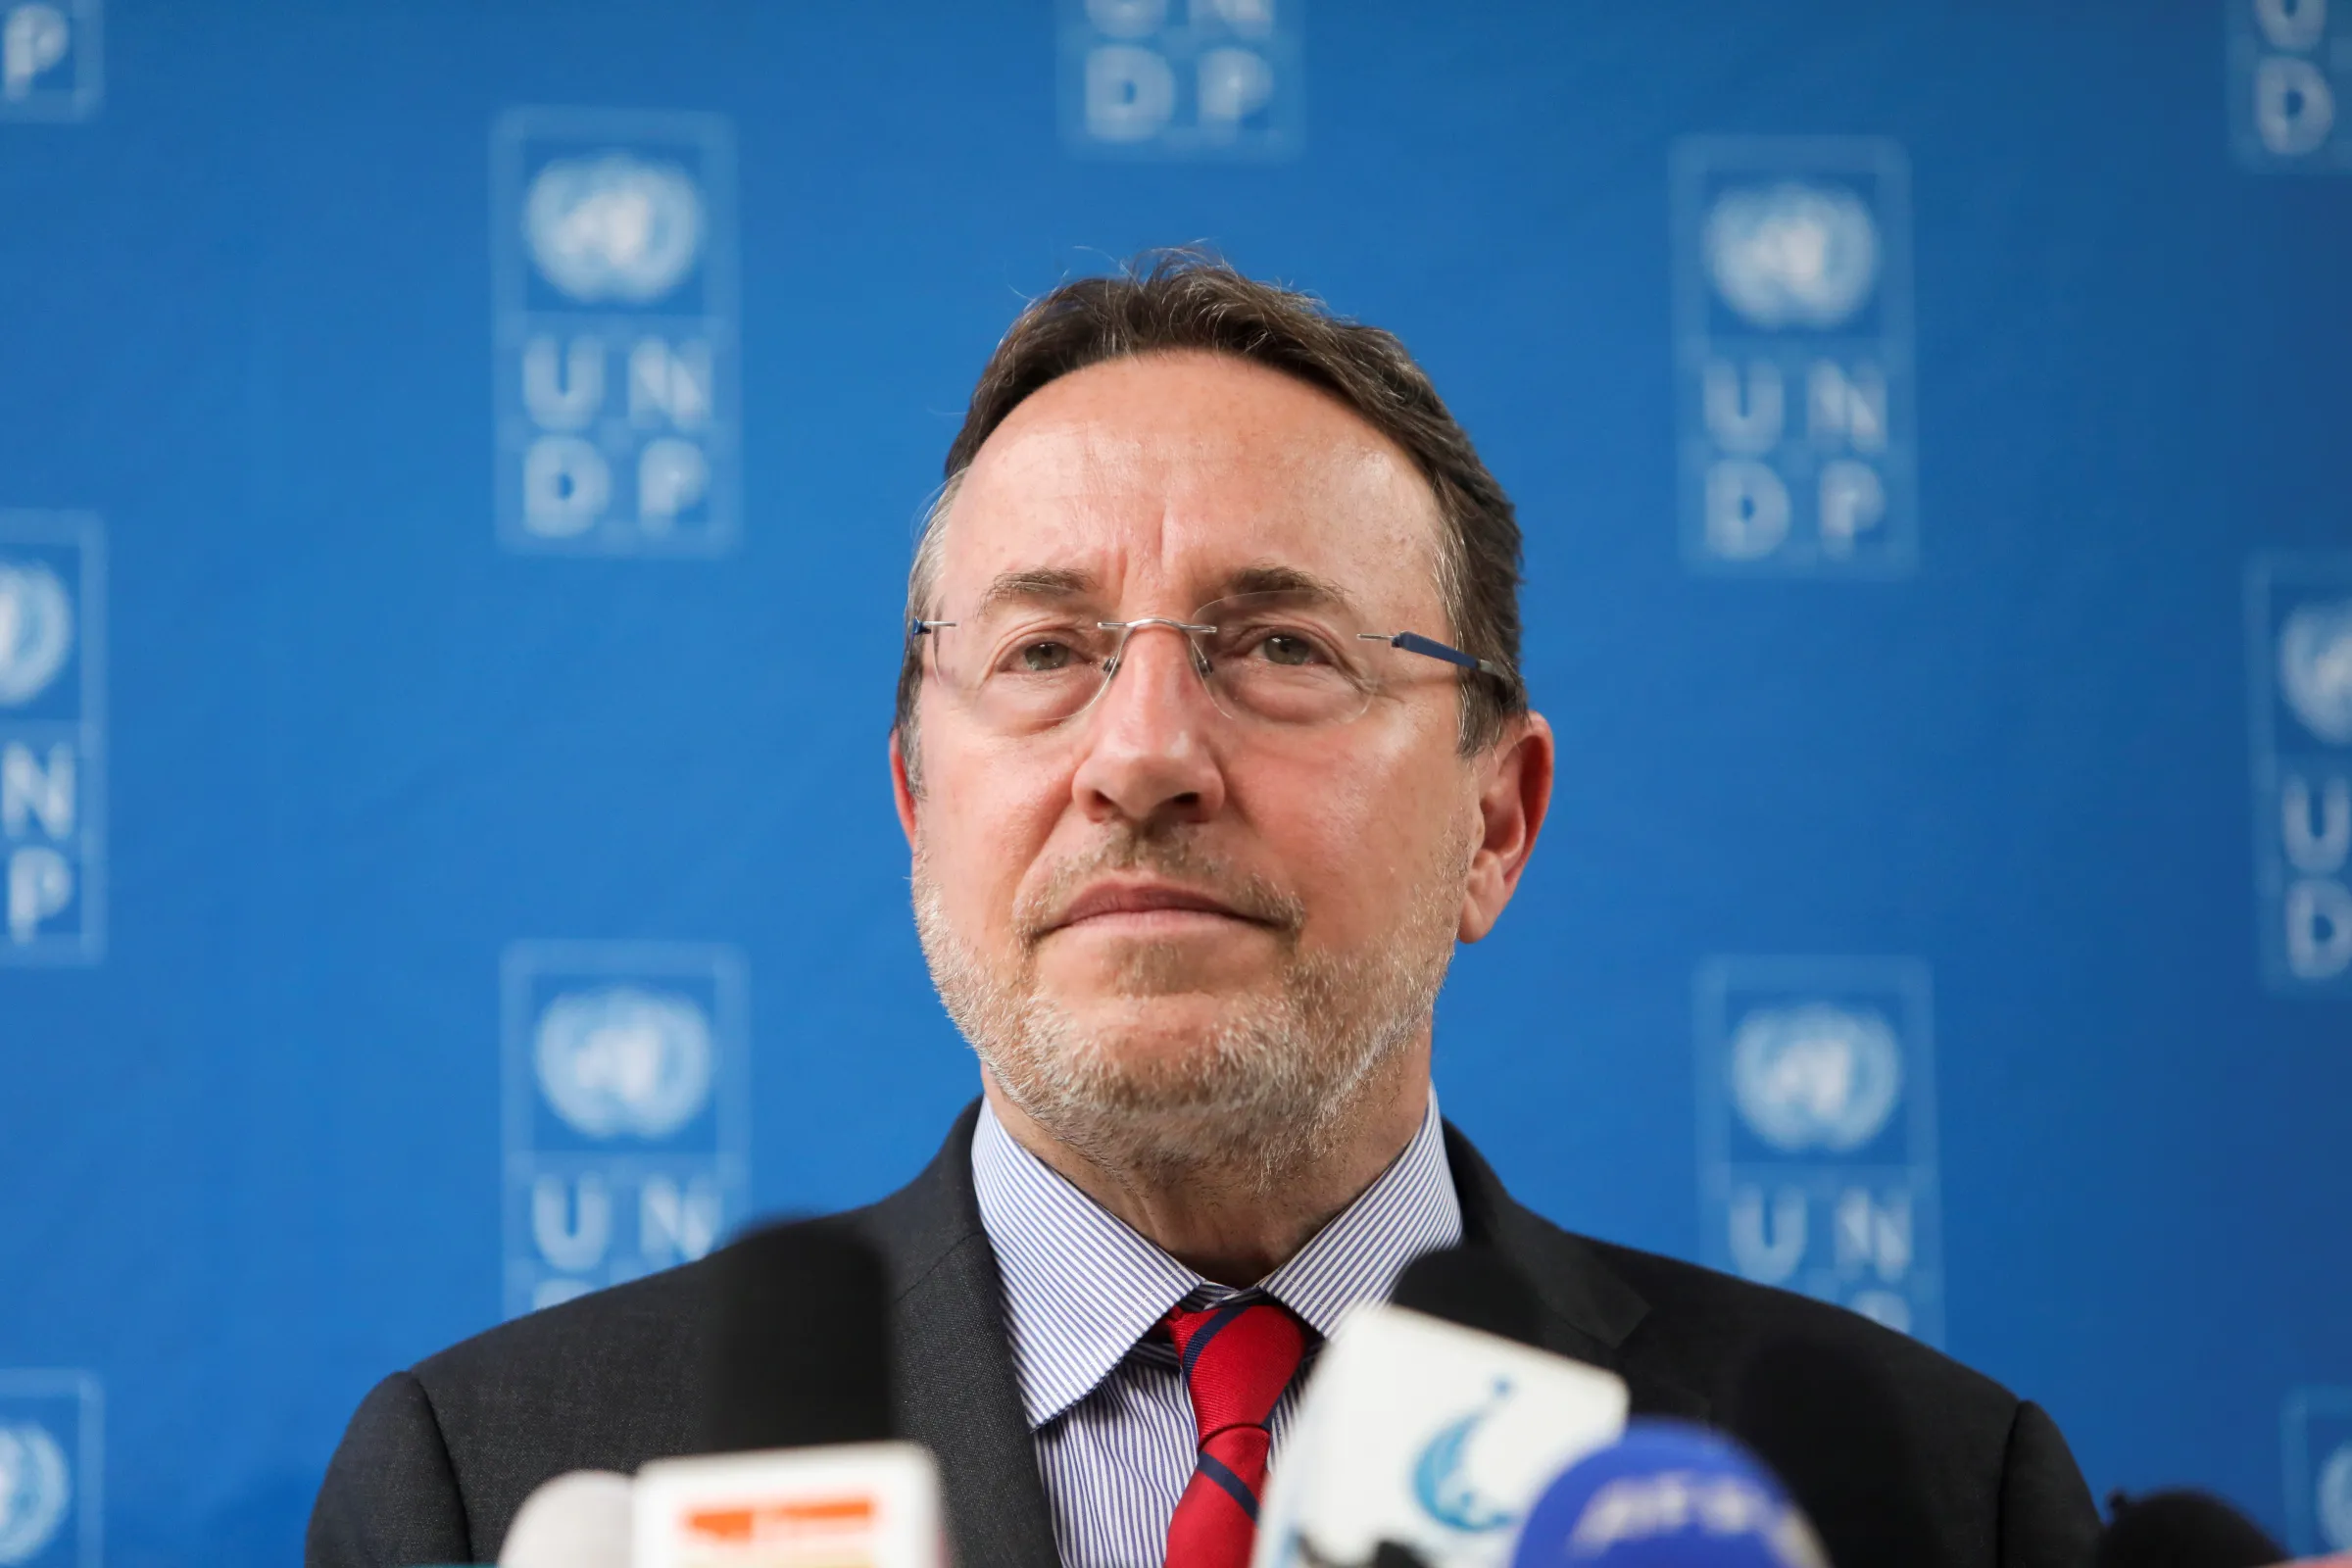 United Nations Development Programme (UNDP) Administrator Achim Steiner speaks during a news conference in Kabul, Afghanistan, March 29, 2022. REUTERS/Ali Khara